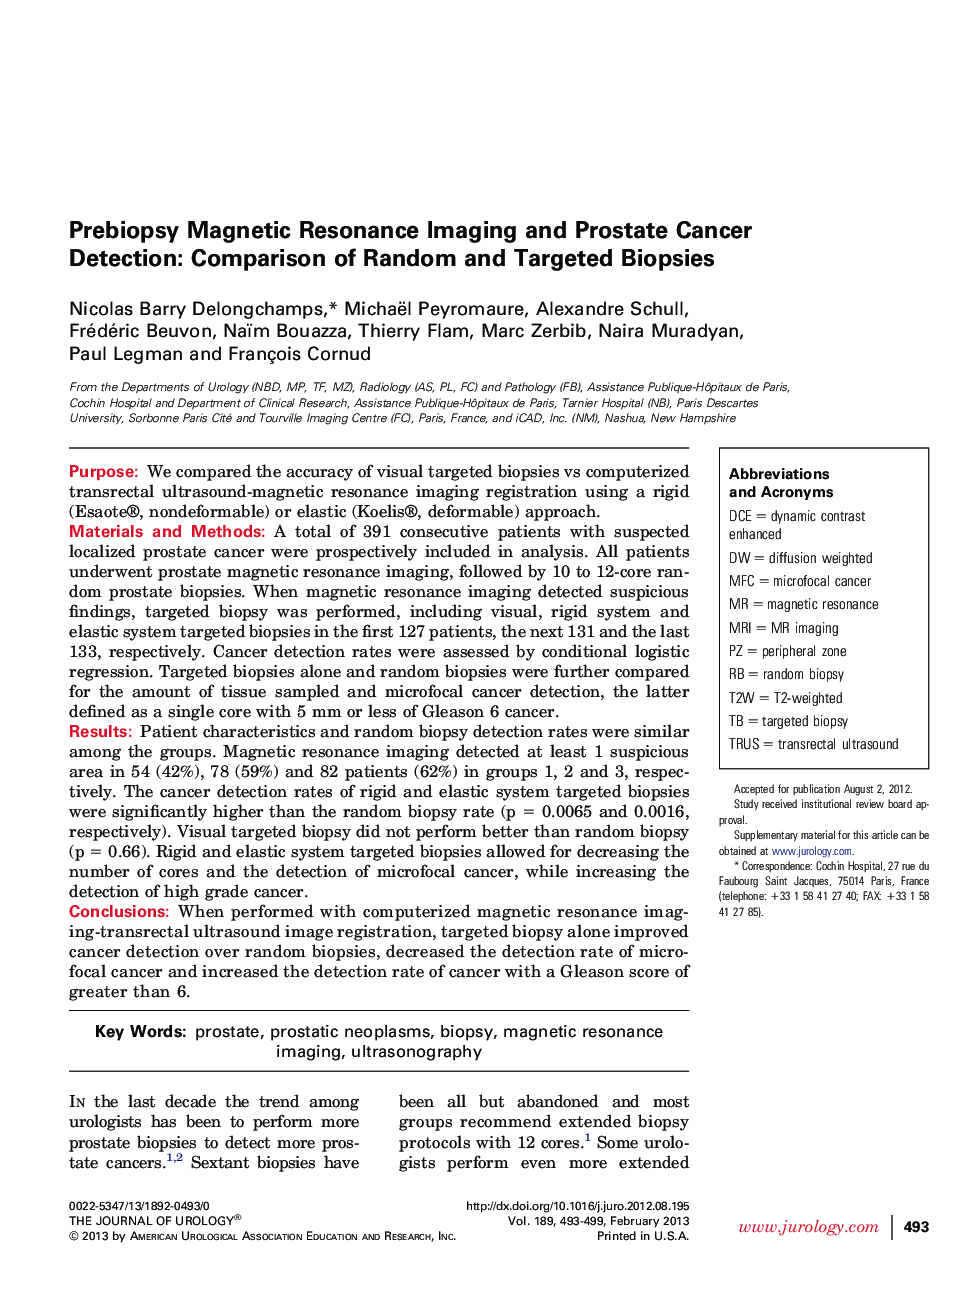 Prebiopsy Magnetic Resonance Imaging and Prostate Cancer Detection: Comparison of Random and Targeted Biopsies 